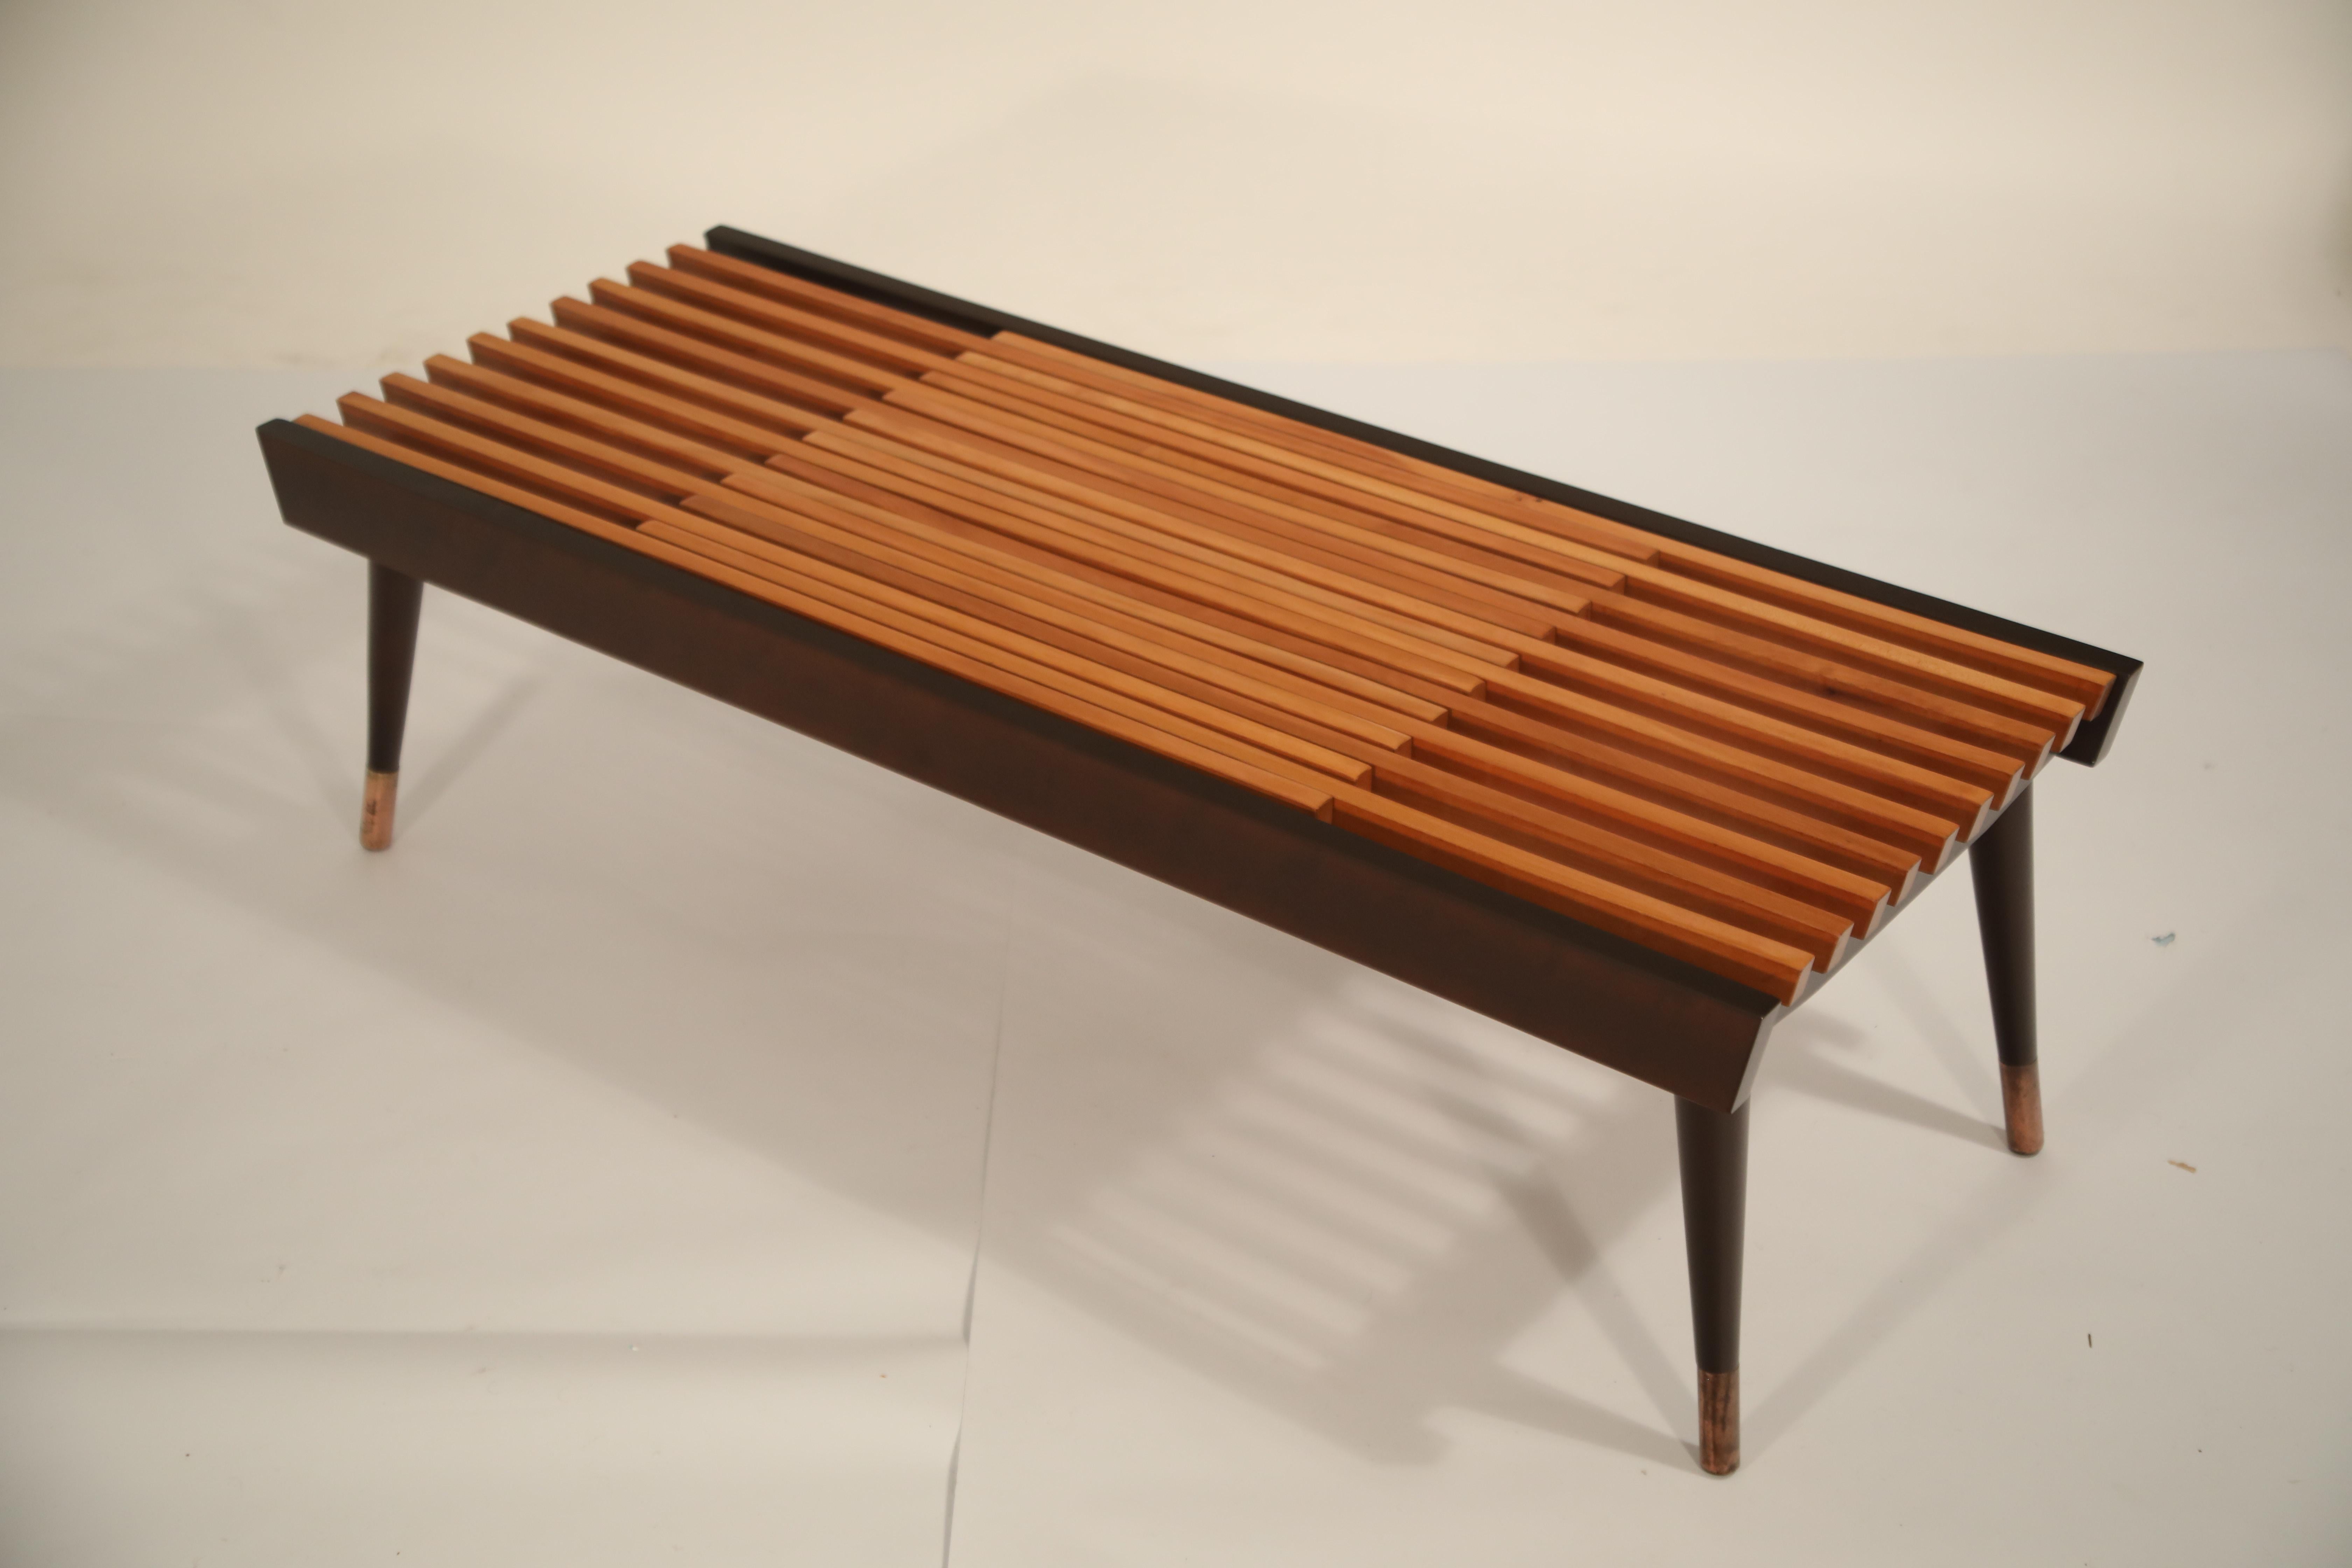 Extendable Slatted Wood Bench or Coffee Table by Maruni, 1950s Hiroshima Japan 4